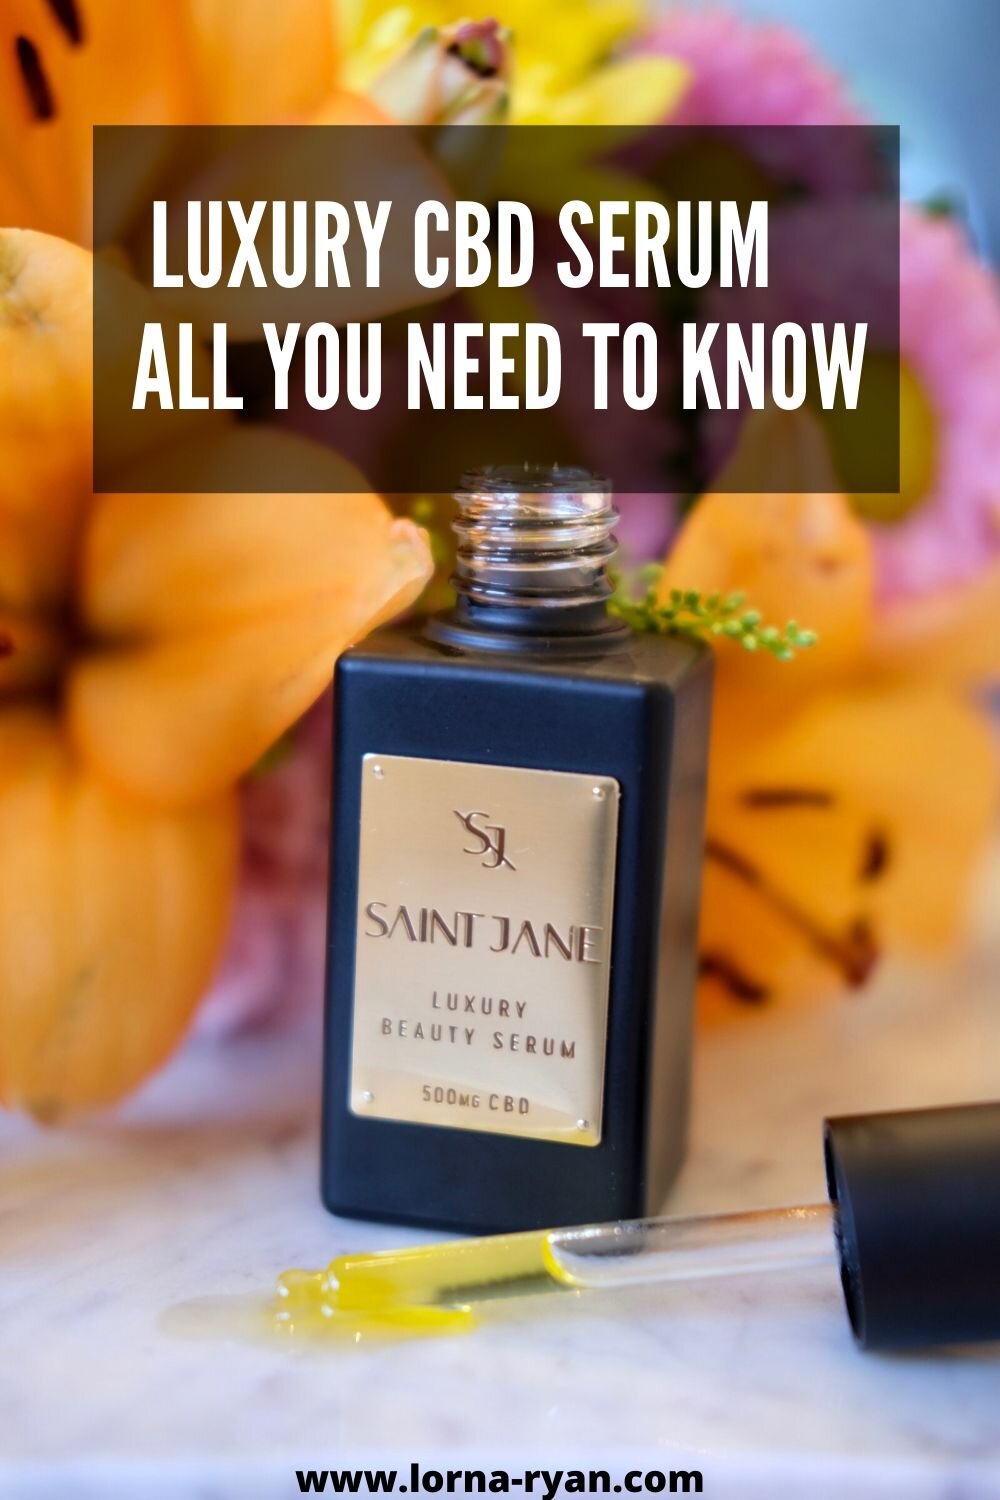 Saint Jane Beauty Review.  A luxury CBD clean beauty brand. Saint Jane Beauty is a luxury CBD beauty brand which I delve into in this Saint Jane Review. Saint Jane Beauty infuses every formula with carefully-curated, sustainably sourced botanicals a…